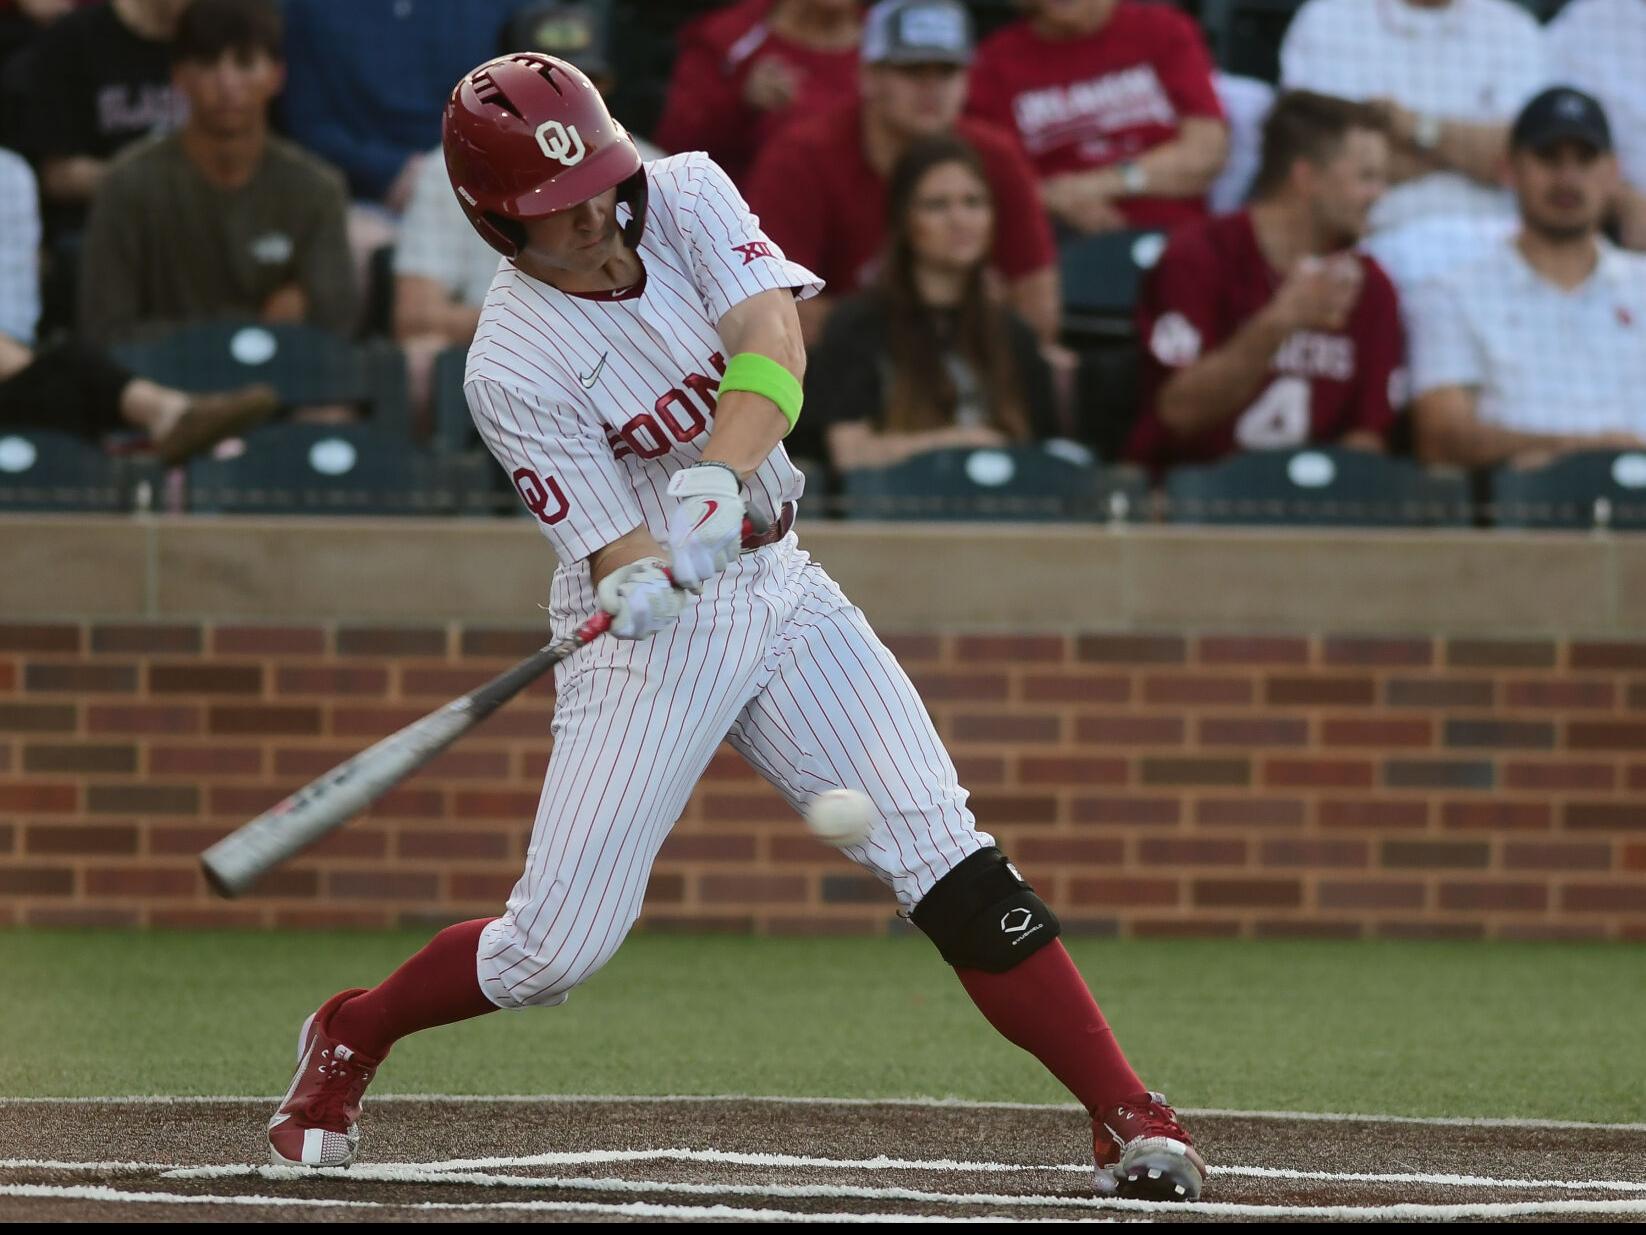 OU baseball: Sooners' offense continues hot stretch with blowout